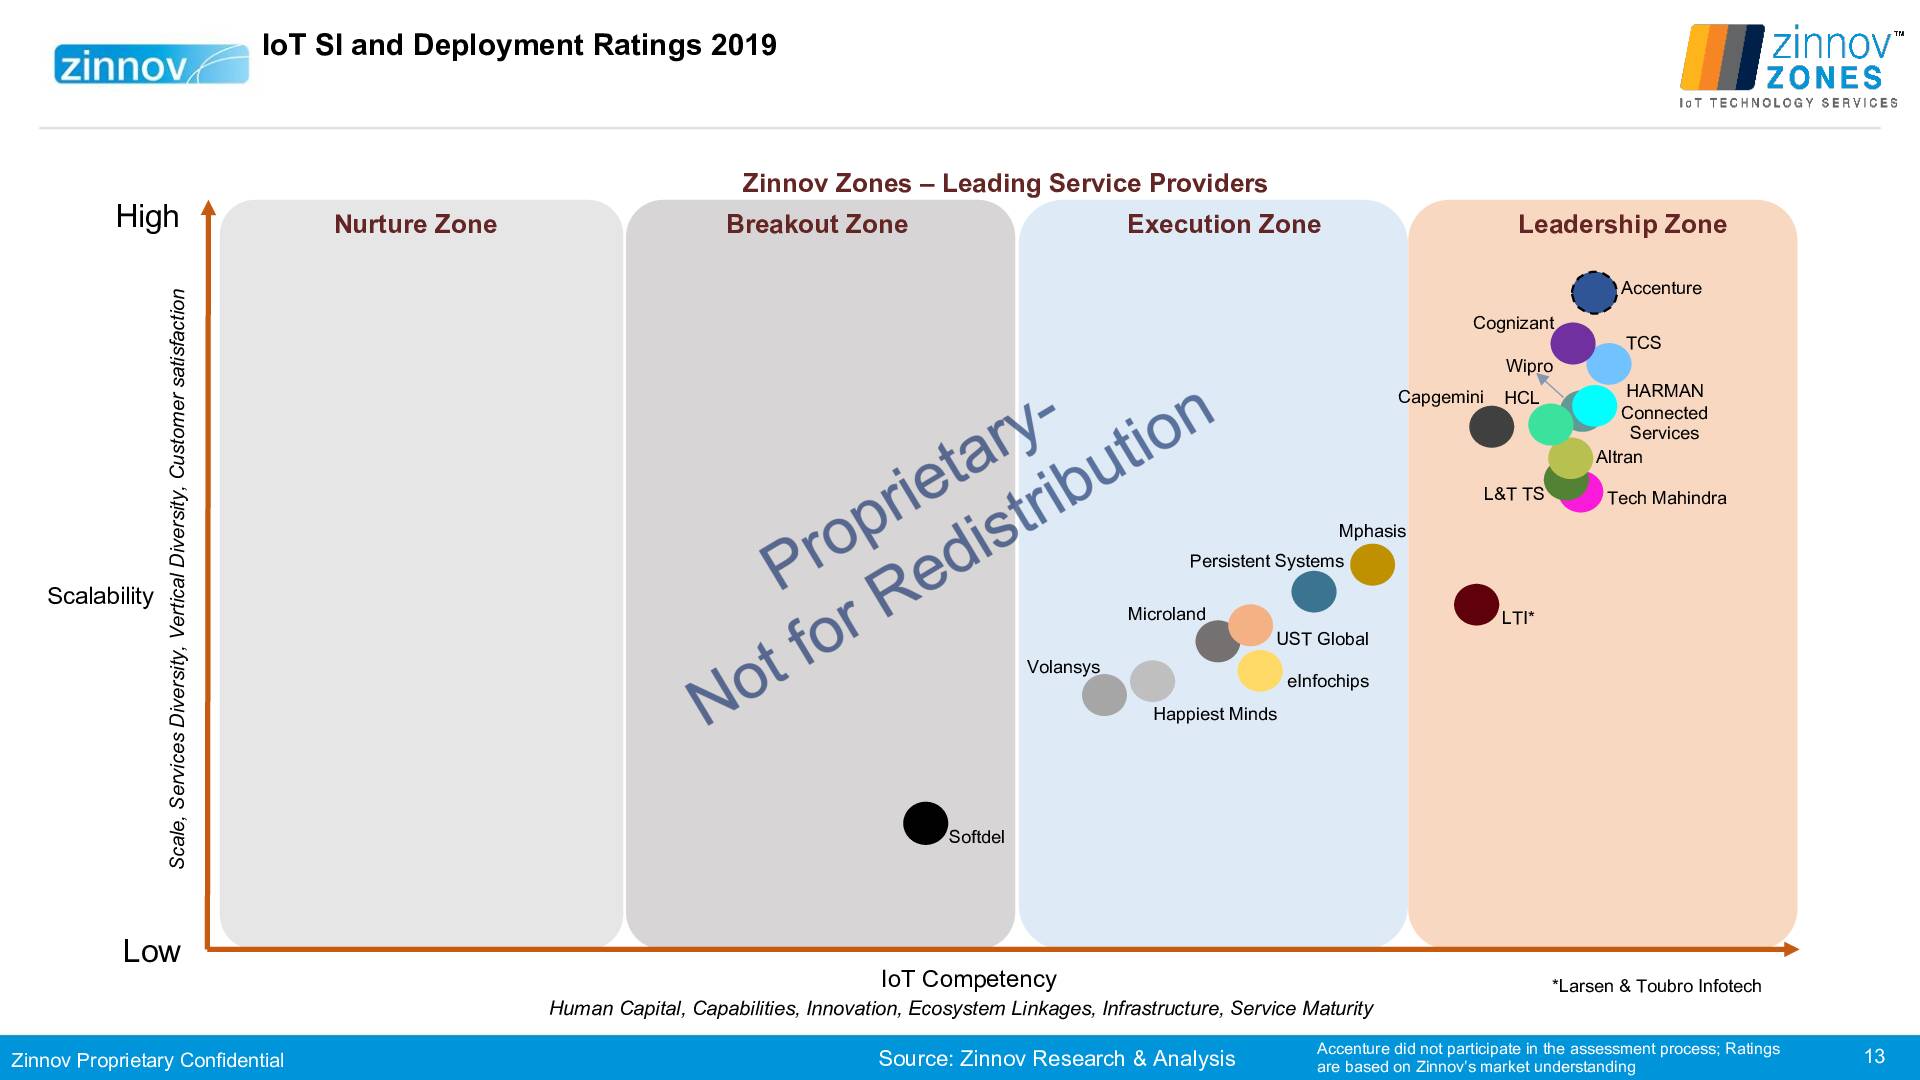 Zinnov Zones Iot Technology Services 2019 Ratings13